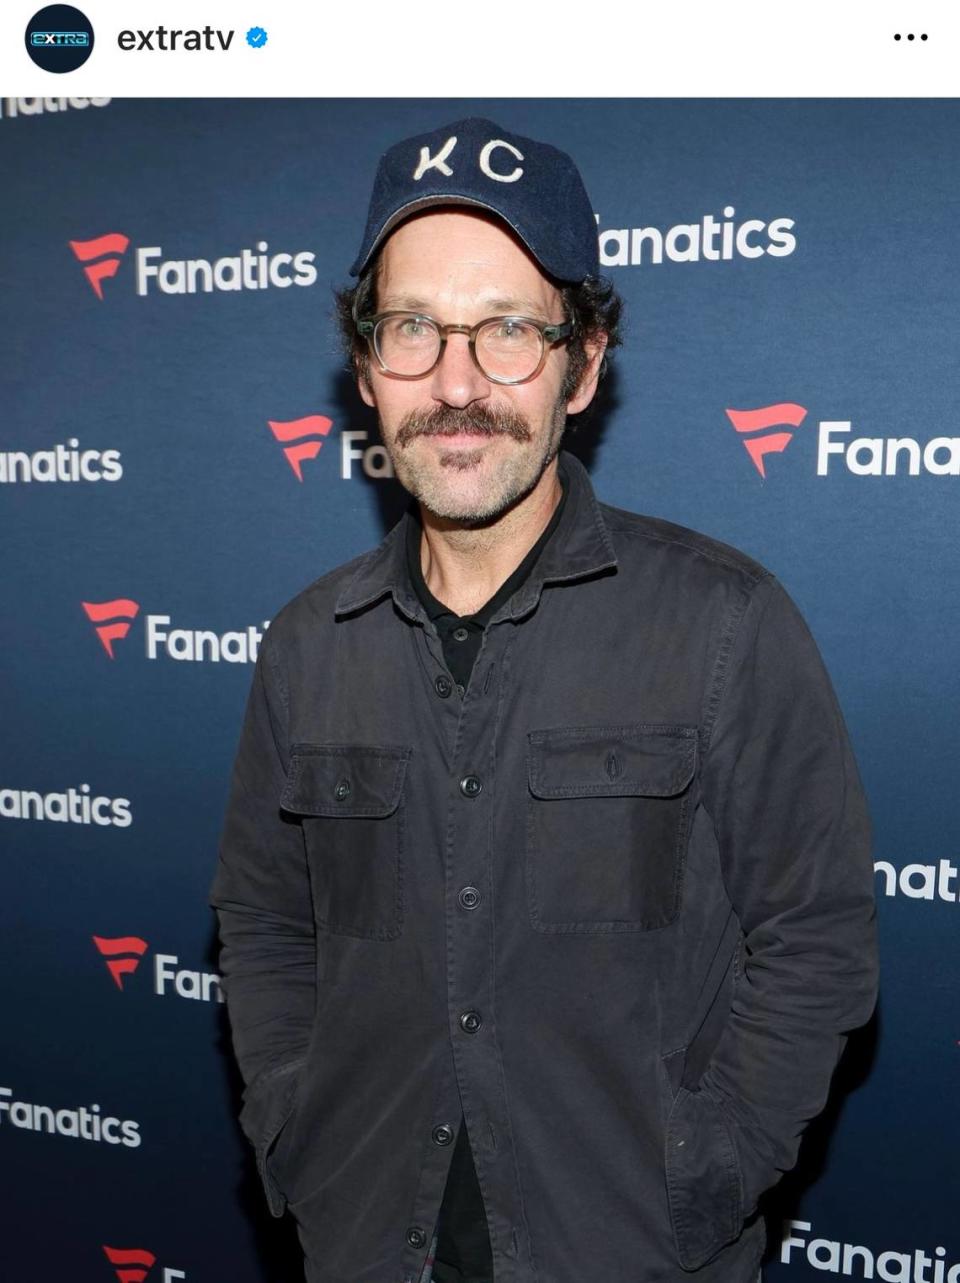 Paul Rudd, cool and casual at the Fanatics Super Bowl Party in Las Vegas.